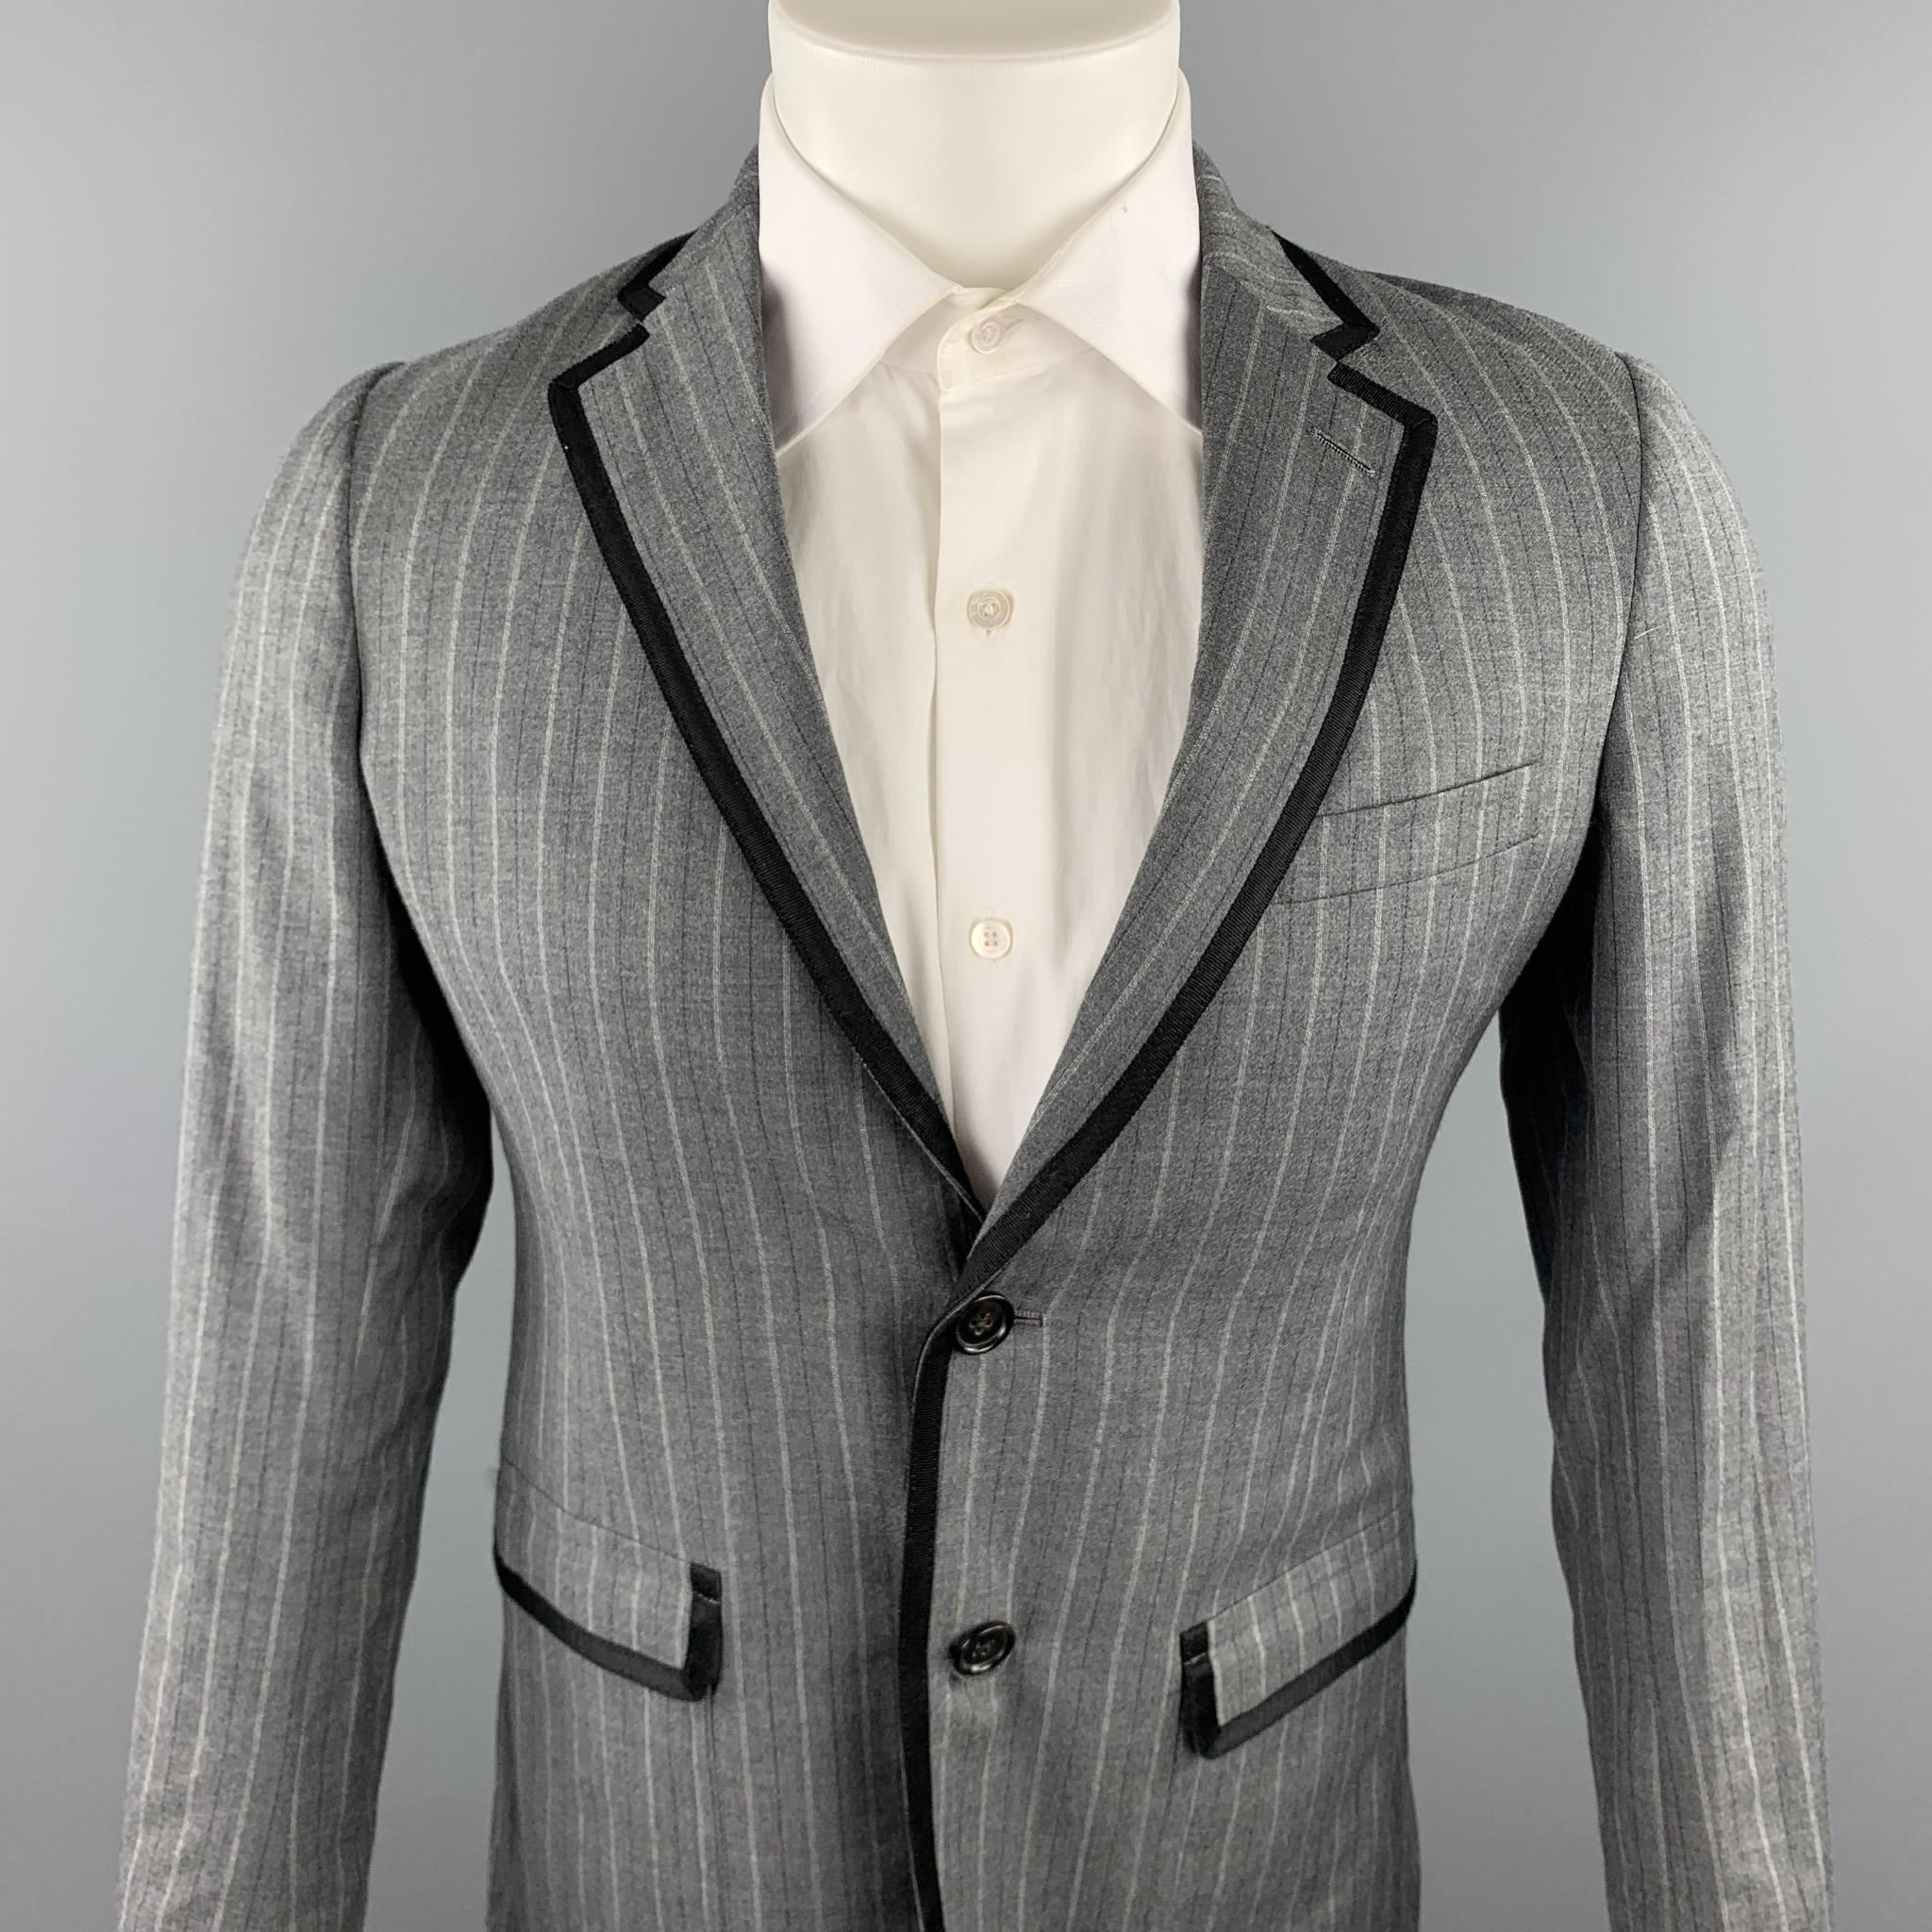 BAND OF OUTSIDERS sport coat comes in a grey stripe wool with a full liner featuring a notch lapel, black ribbon trim, flap pockets, and double button closure. Made in USA.

Very Good Pre-Owned Condition.
Marked: 1

Measurements:

Shoulder: 16 in.